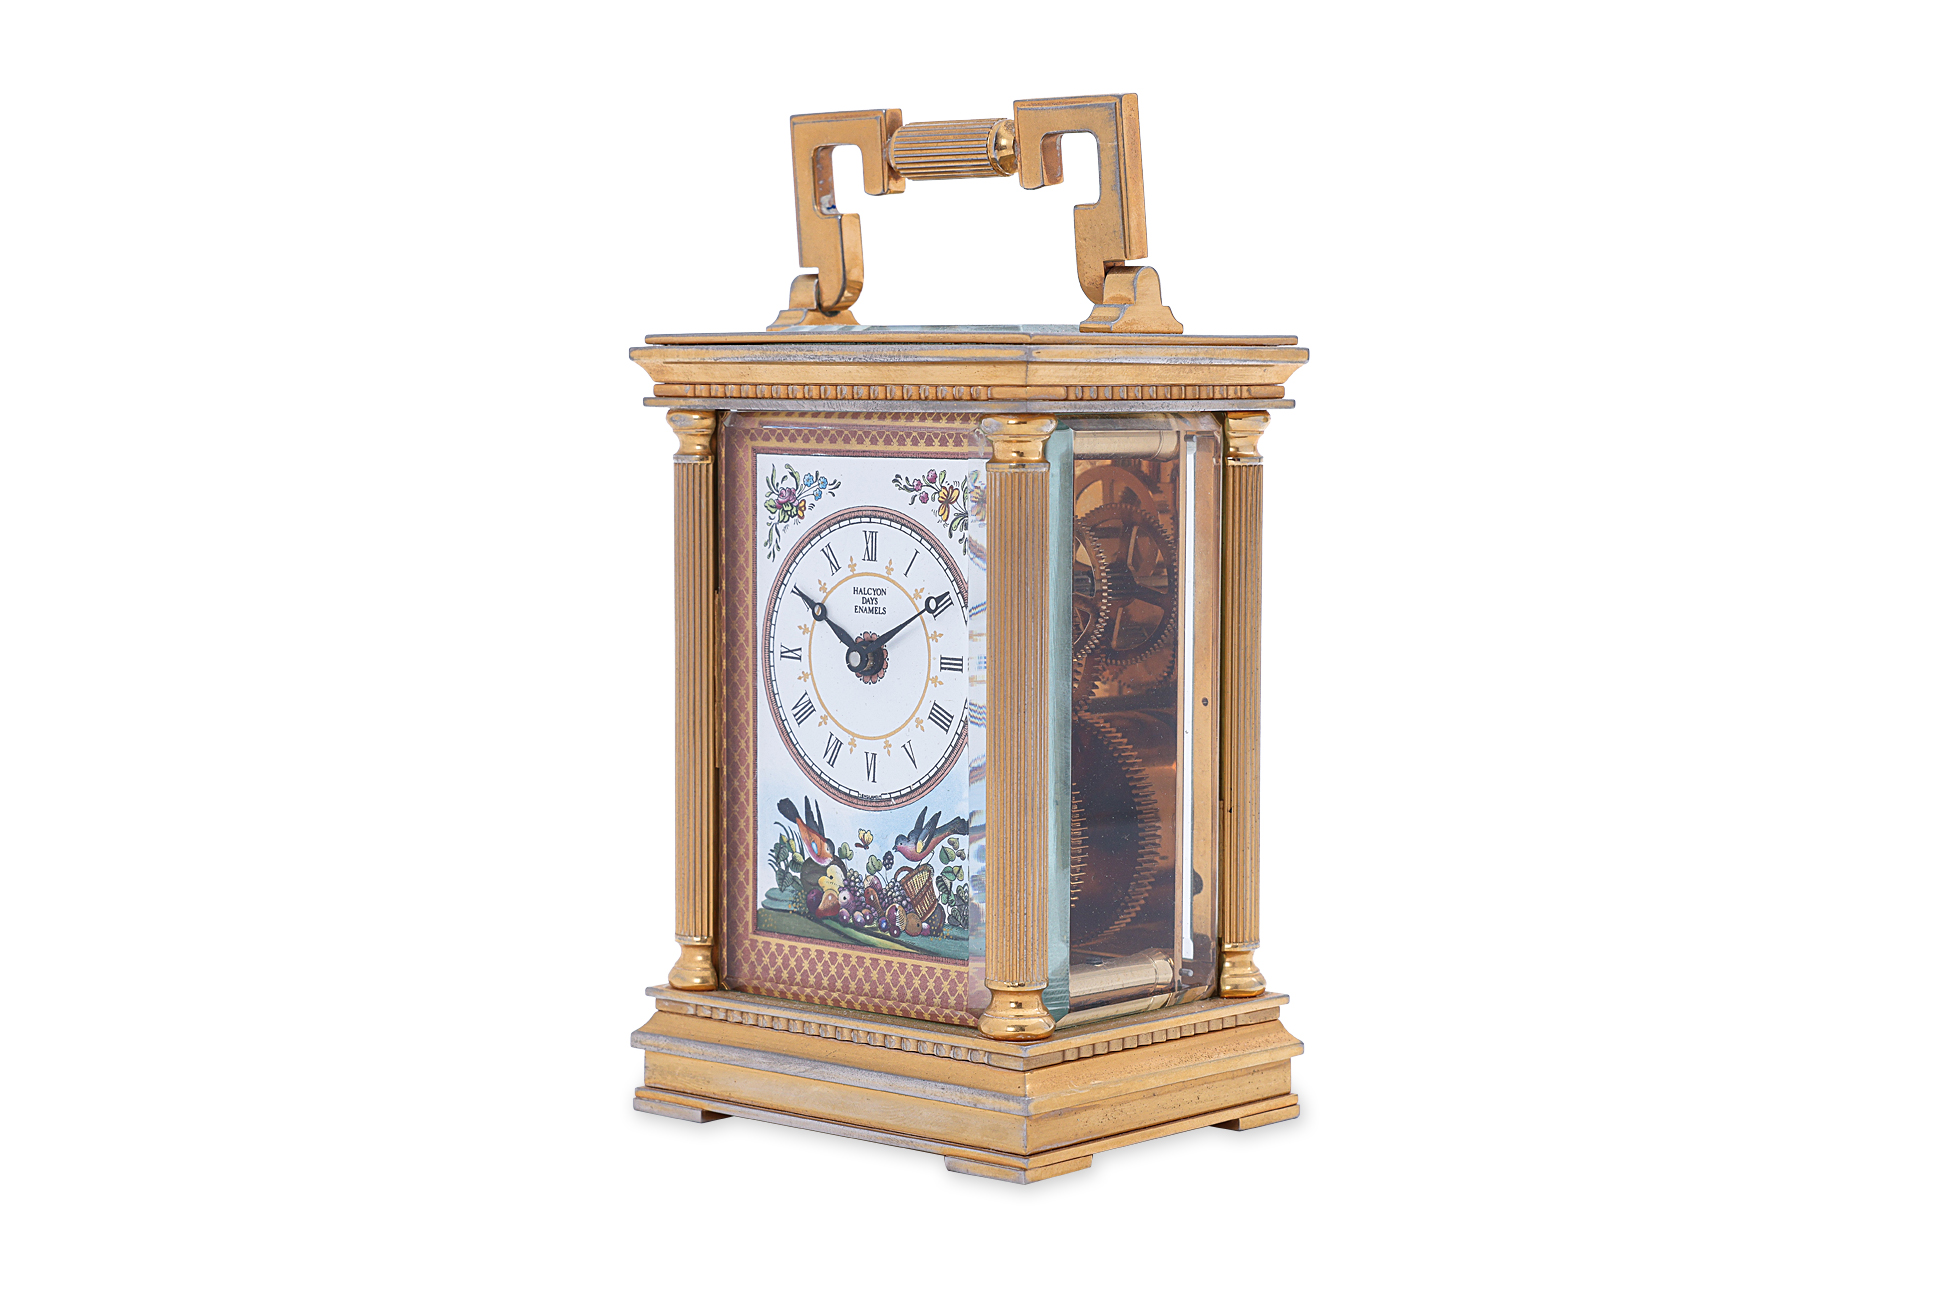 A HALCYON DAYS LIMITED EDITION ENAMEL CARRIAGE CLOCK - Image 2 of 3